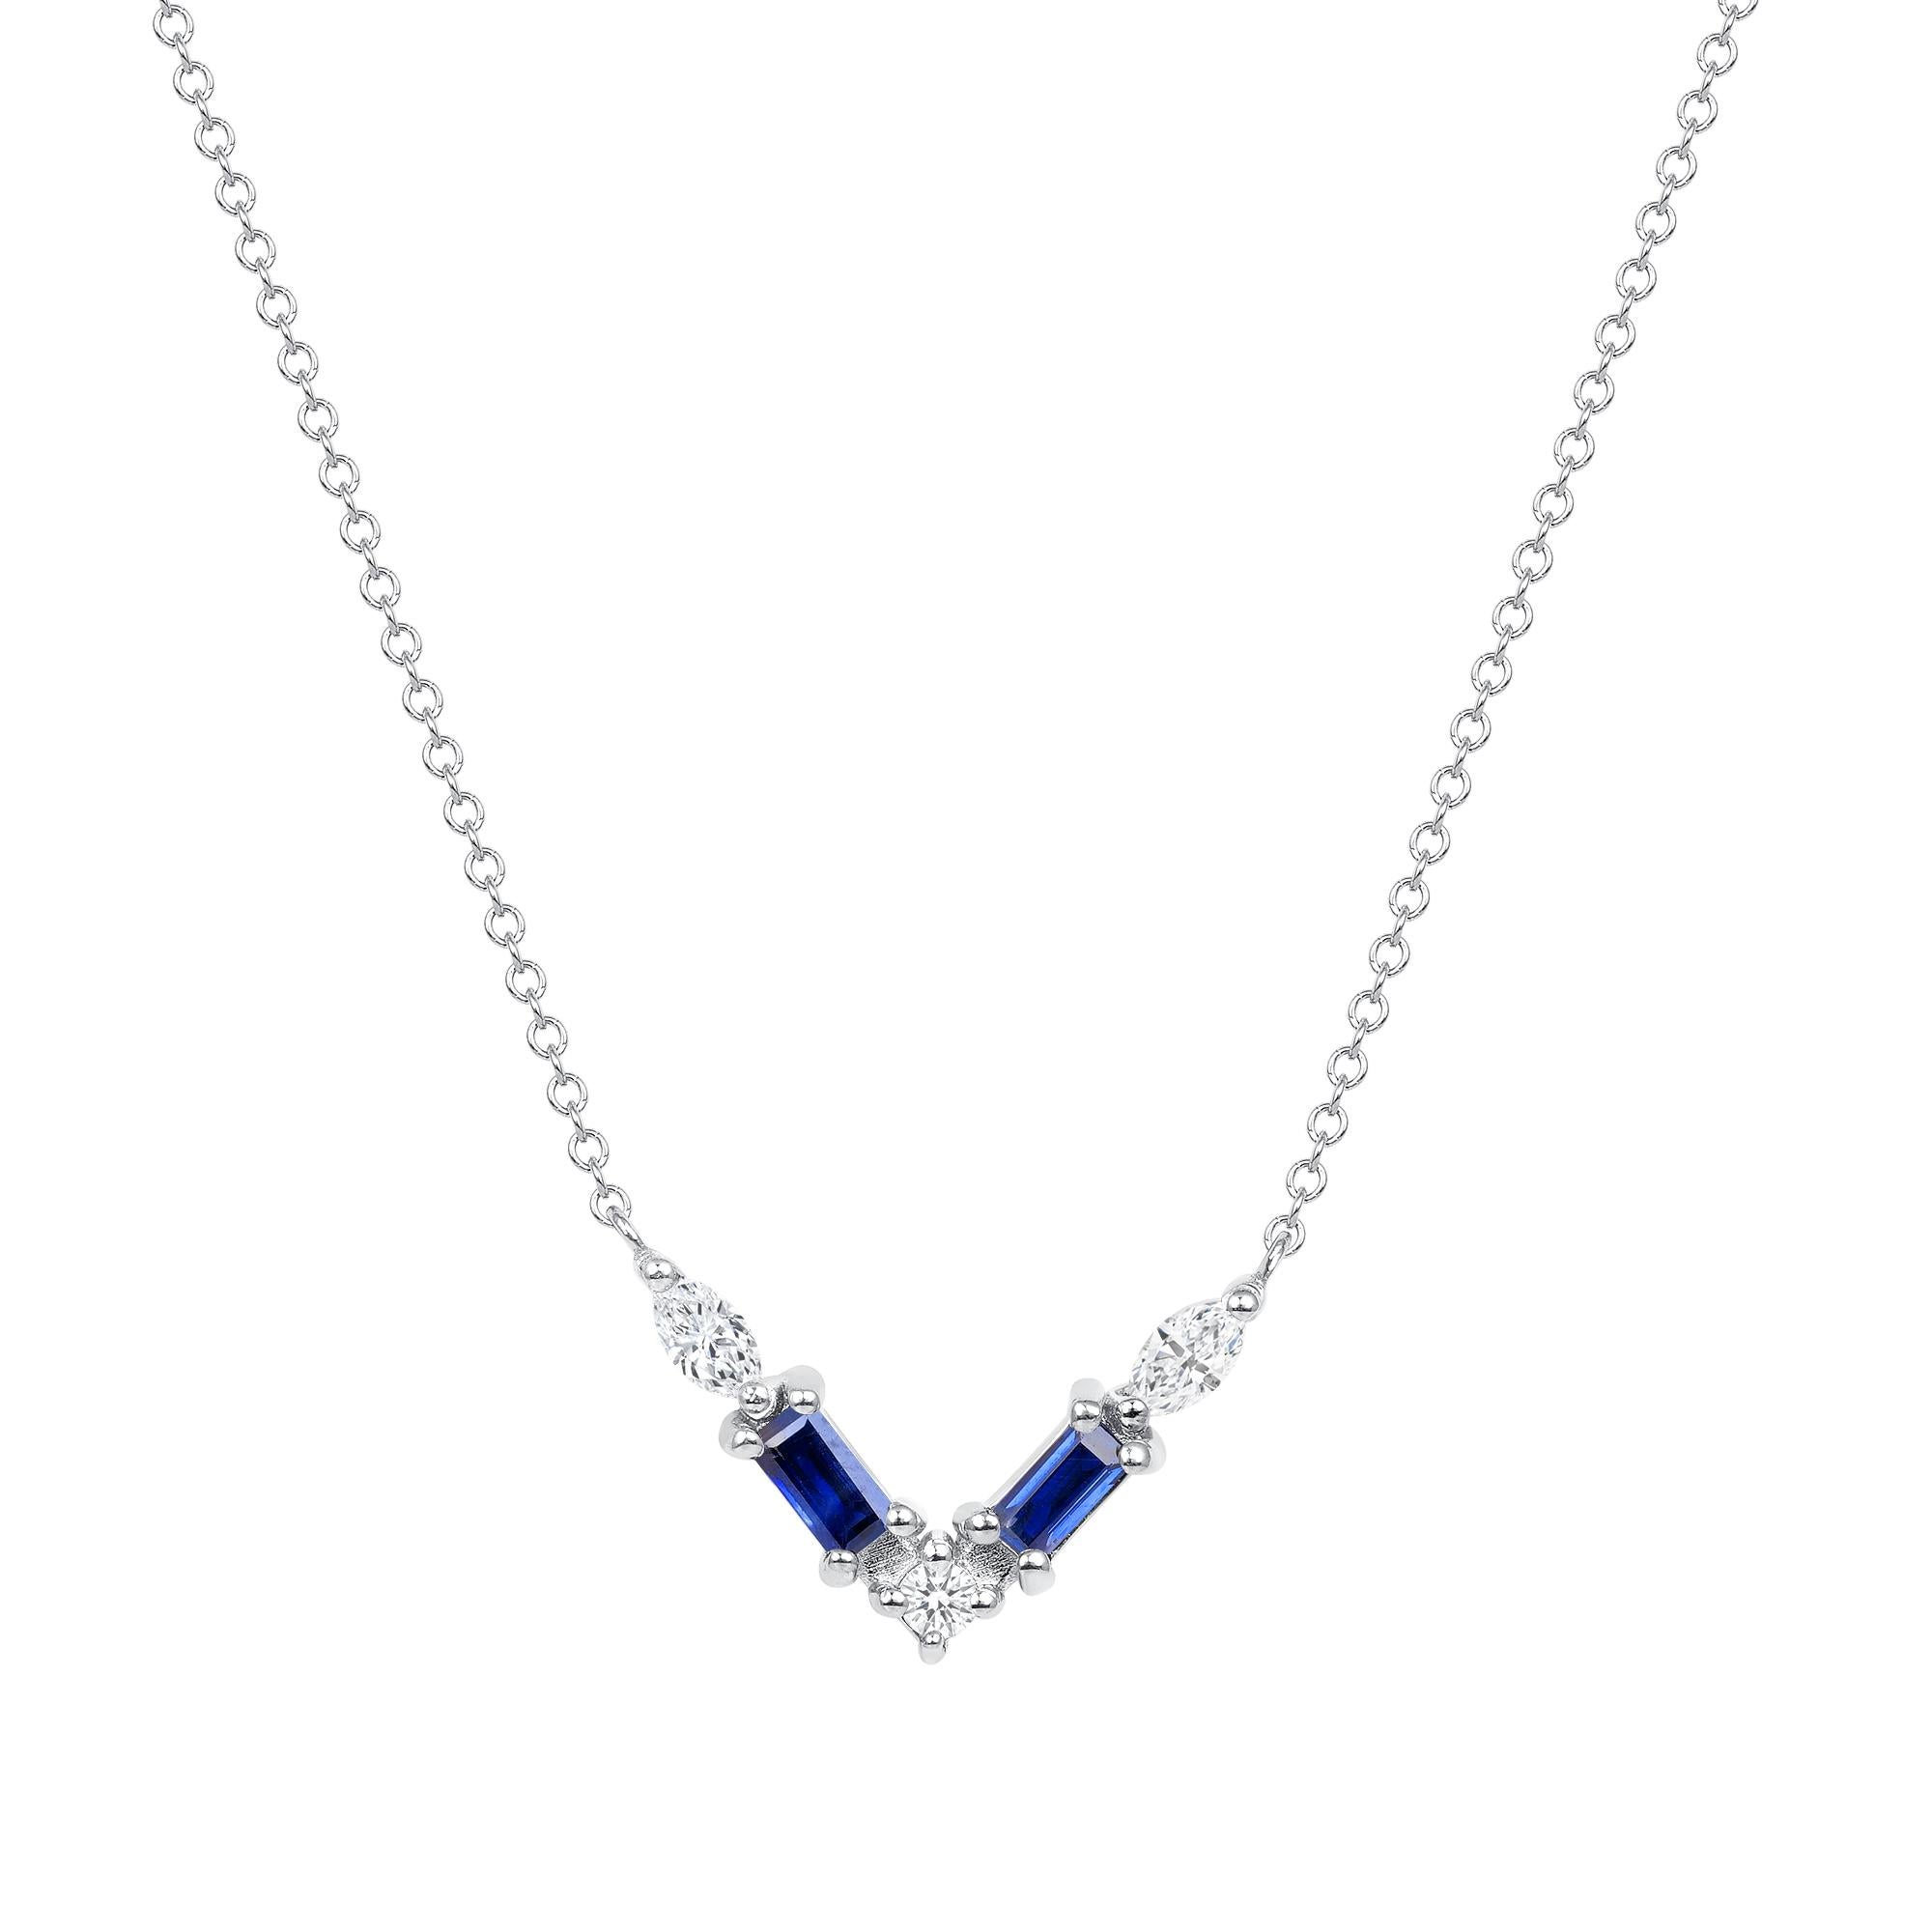 Crafted in 14K gold, this necklace features a thoughtfully arranged collection of London blue topaz gemstones and diamond pavé, elegantly set along a V-shaped plane. Crafted in 14K rose gold, it exudes delicacy and emotion, showcasing a captivating